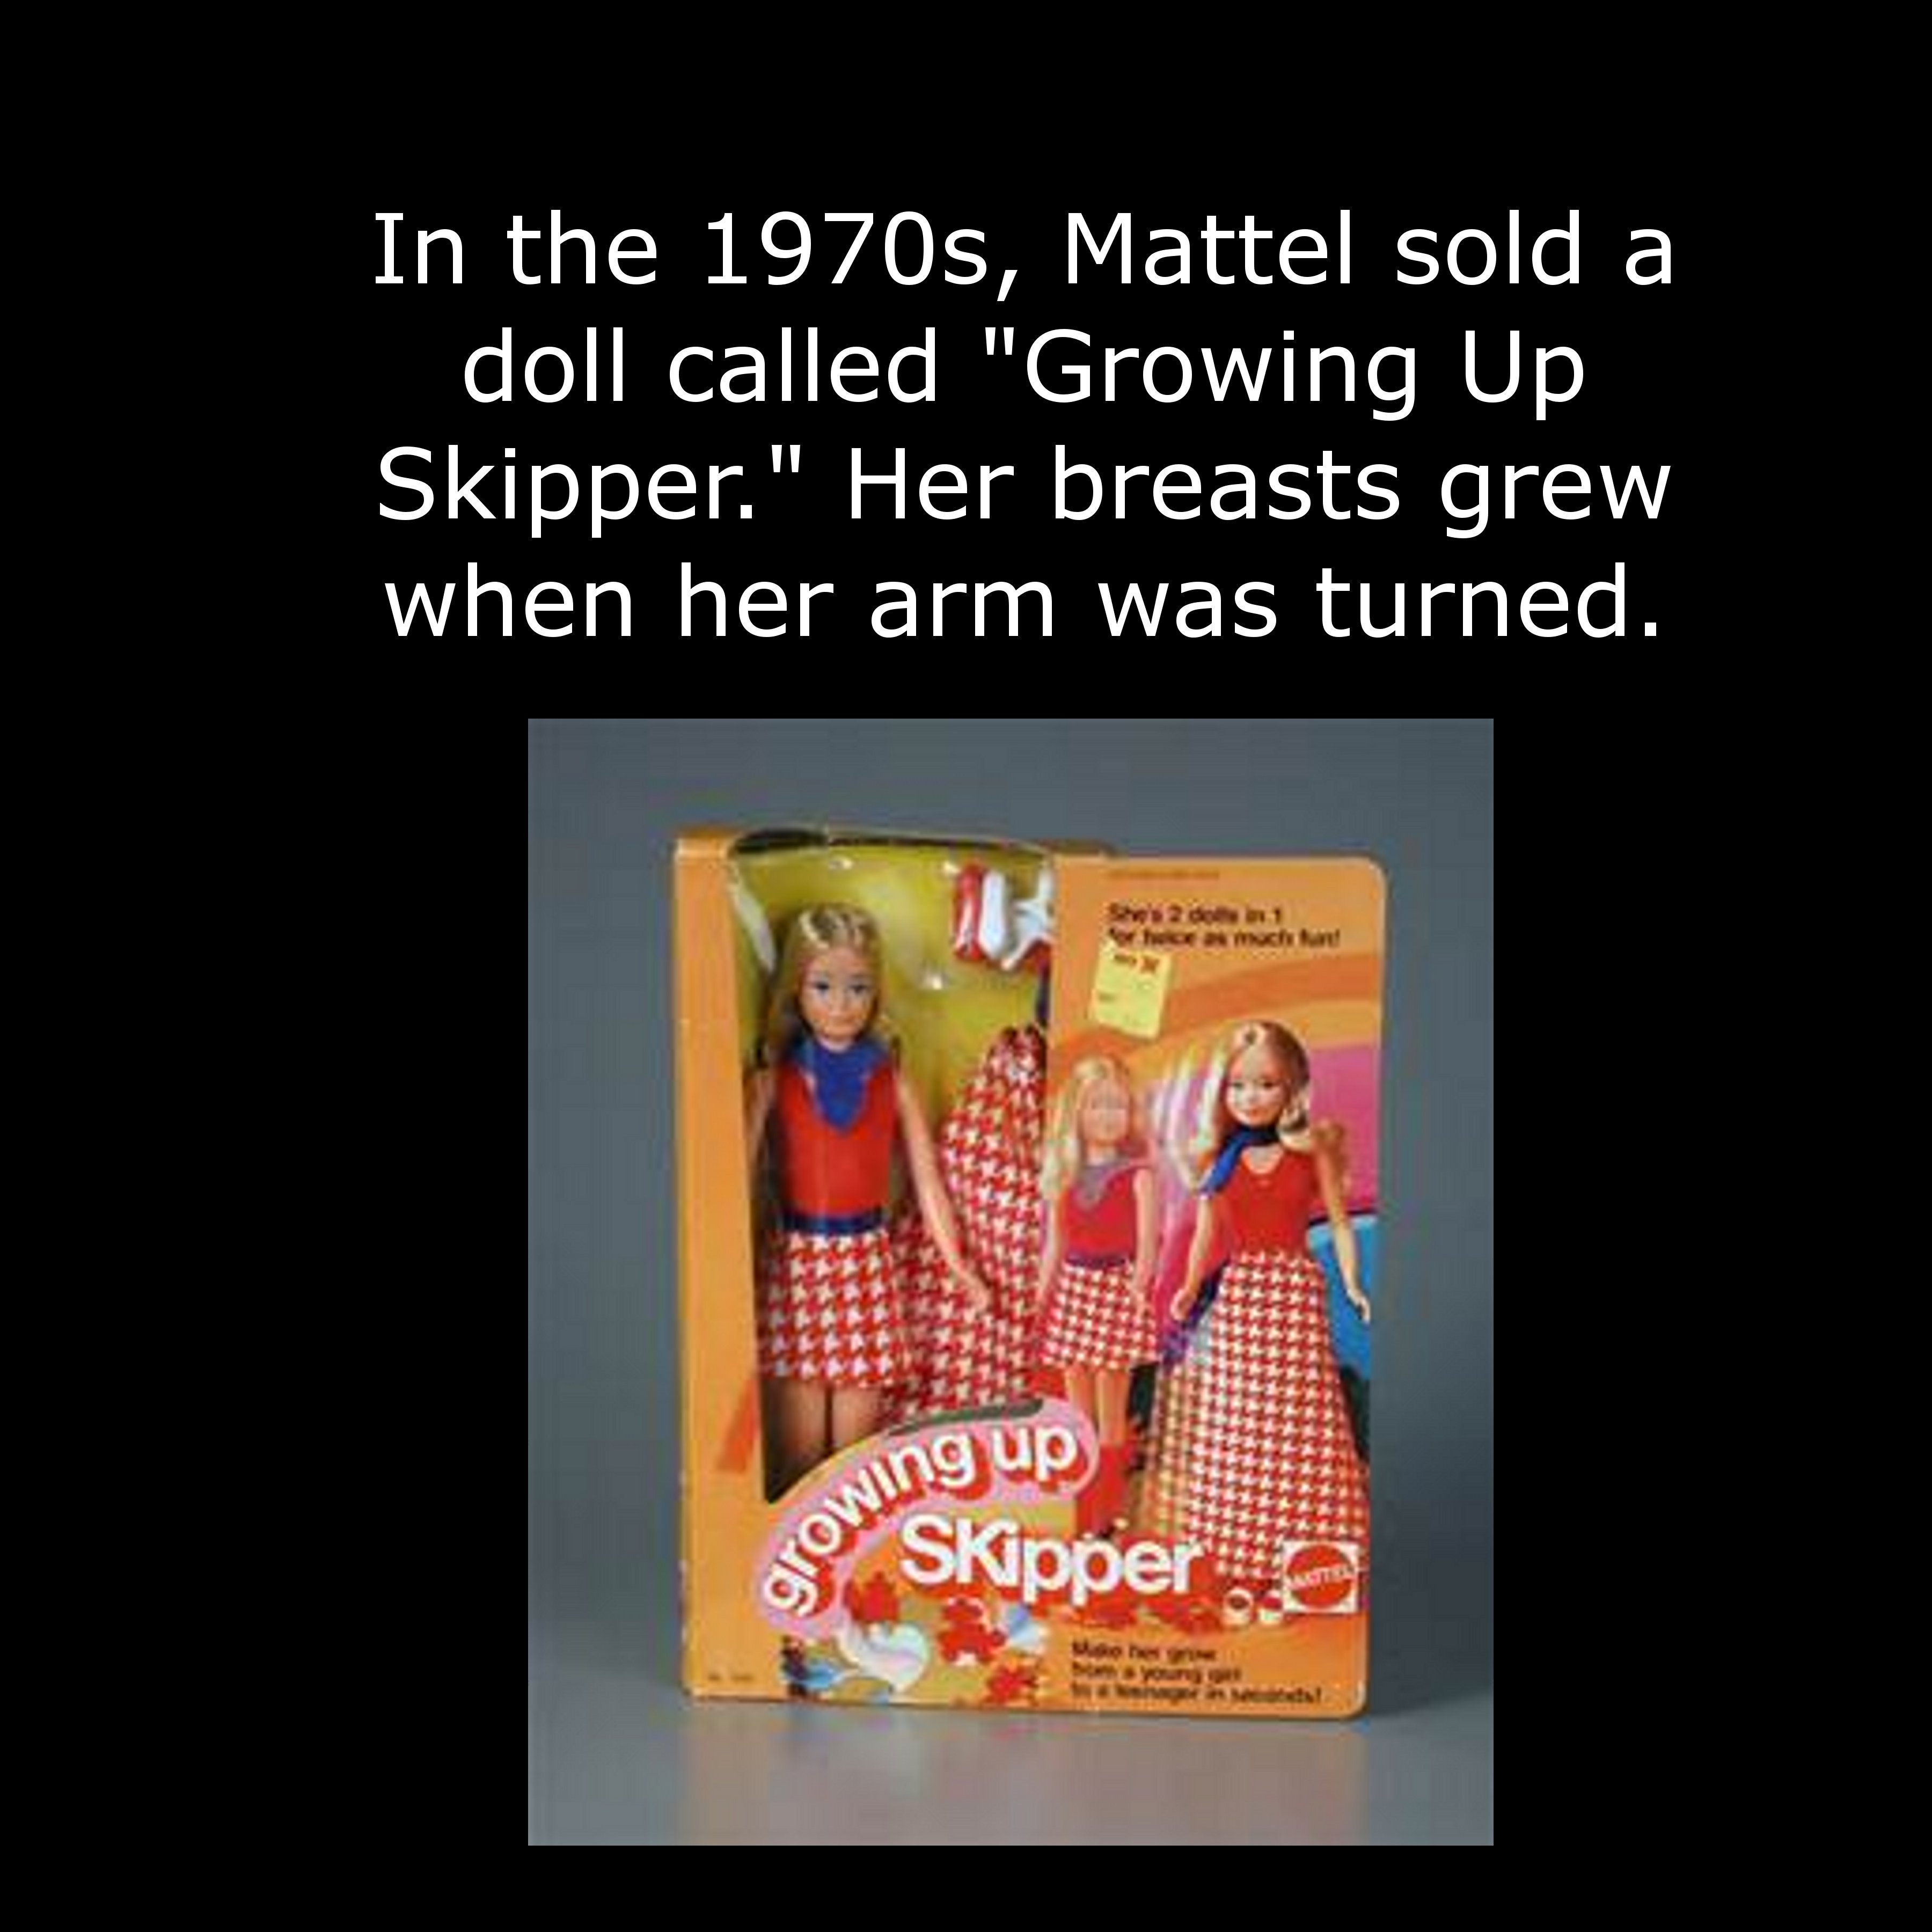 in the 1970 matel sold a doll growing up skipper